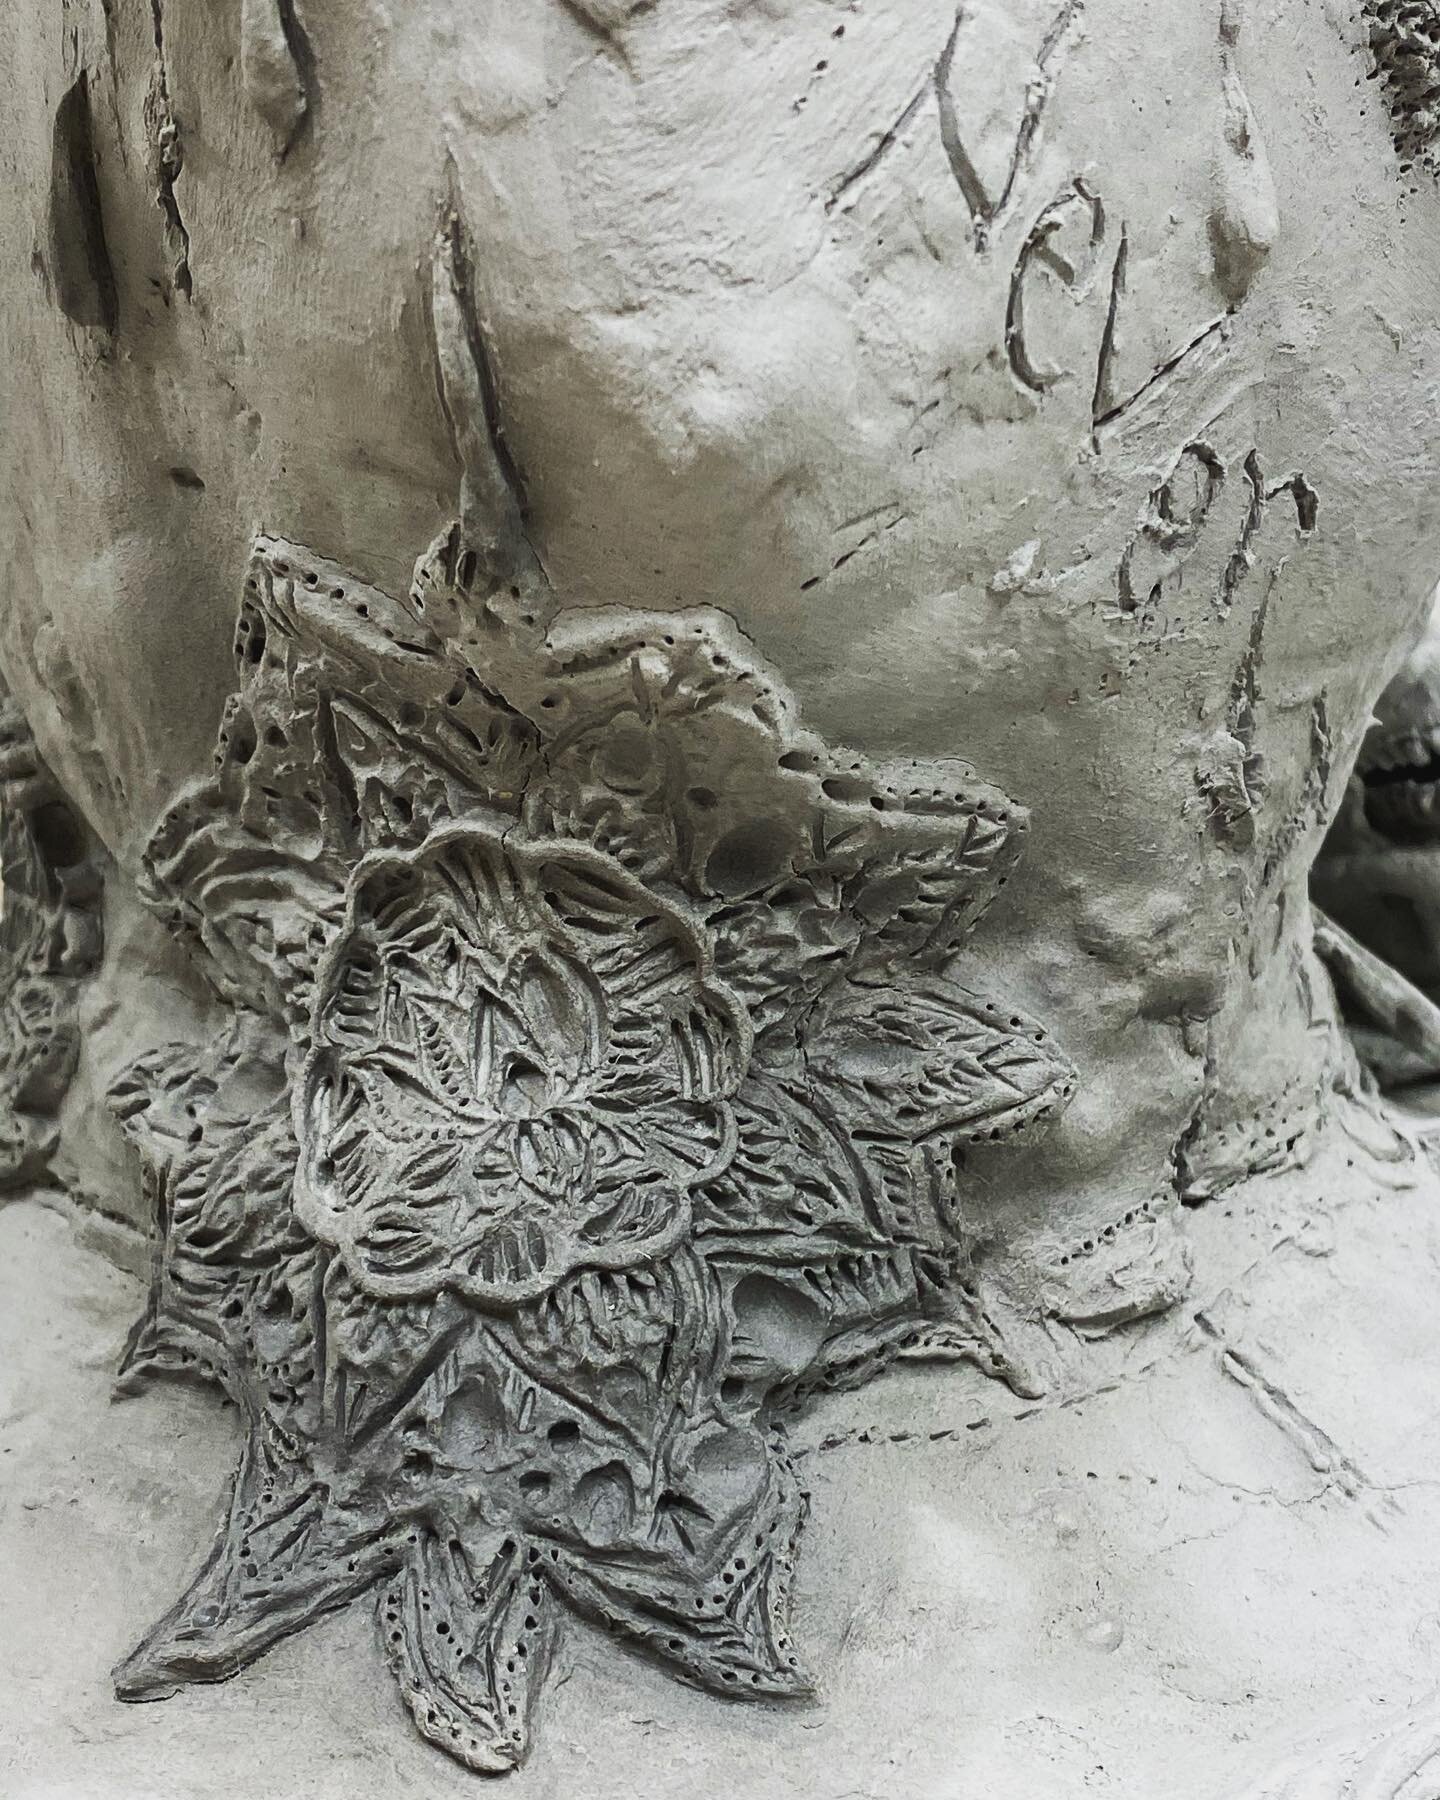 Repetitive mark making into clay is a beautiful process. This is a detail of a rough mandala in process, sculpted into the back of sculpture.  Observing the changing grey tones of the clay drying, gives such contentment.  #elegance #dryingclay #repet